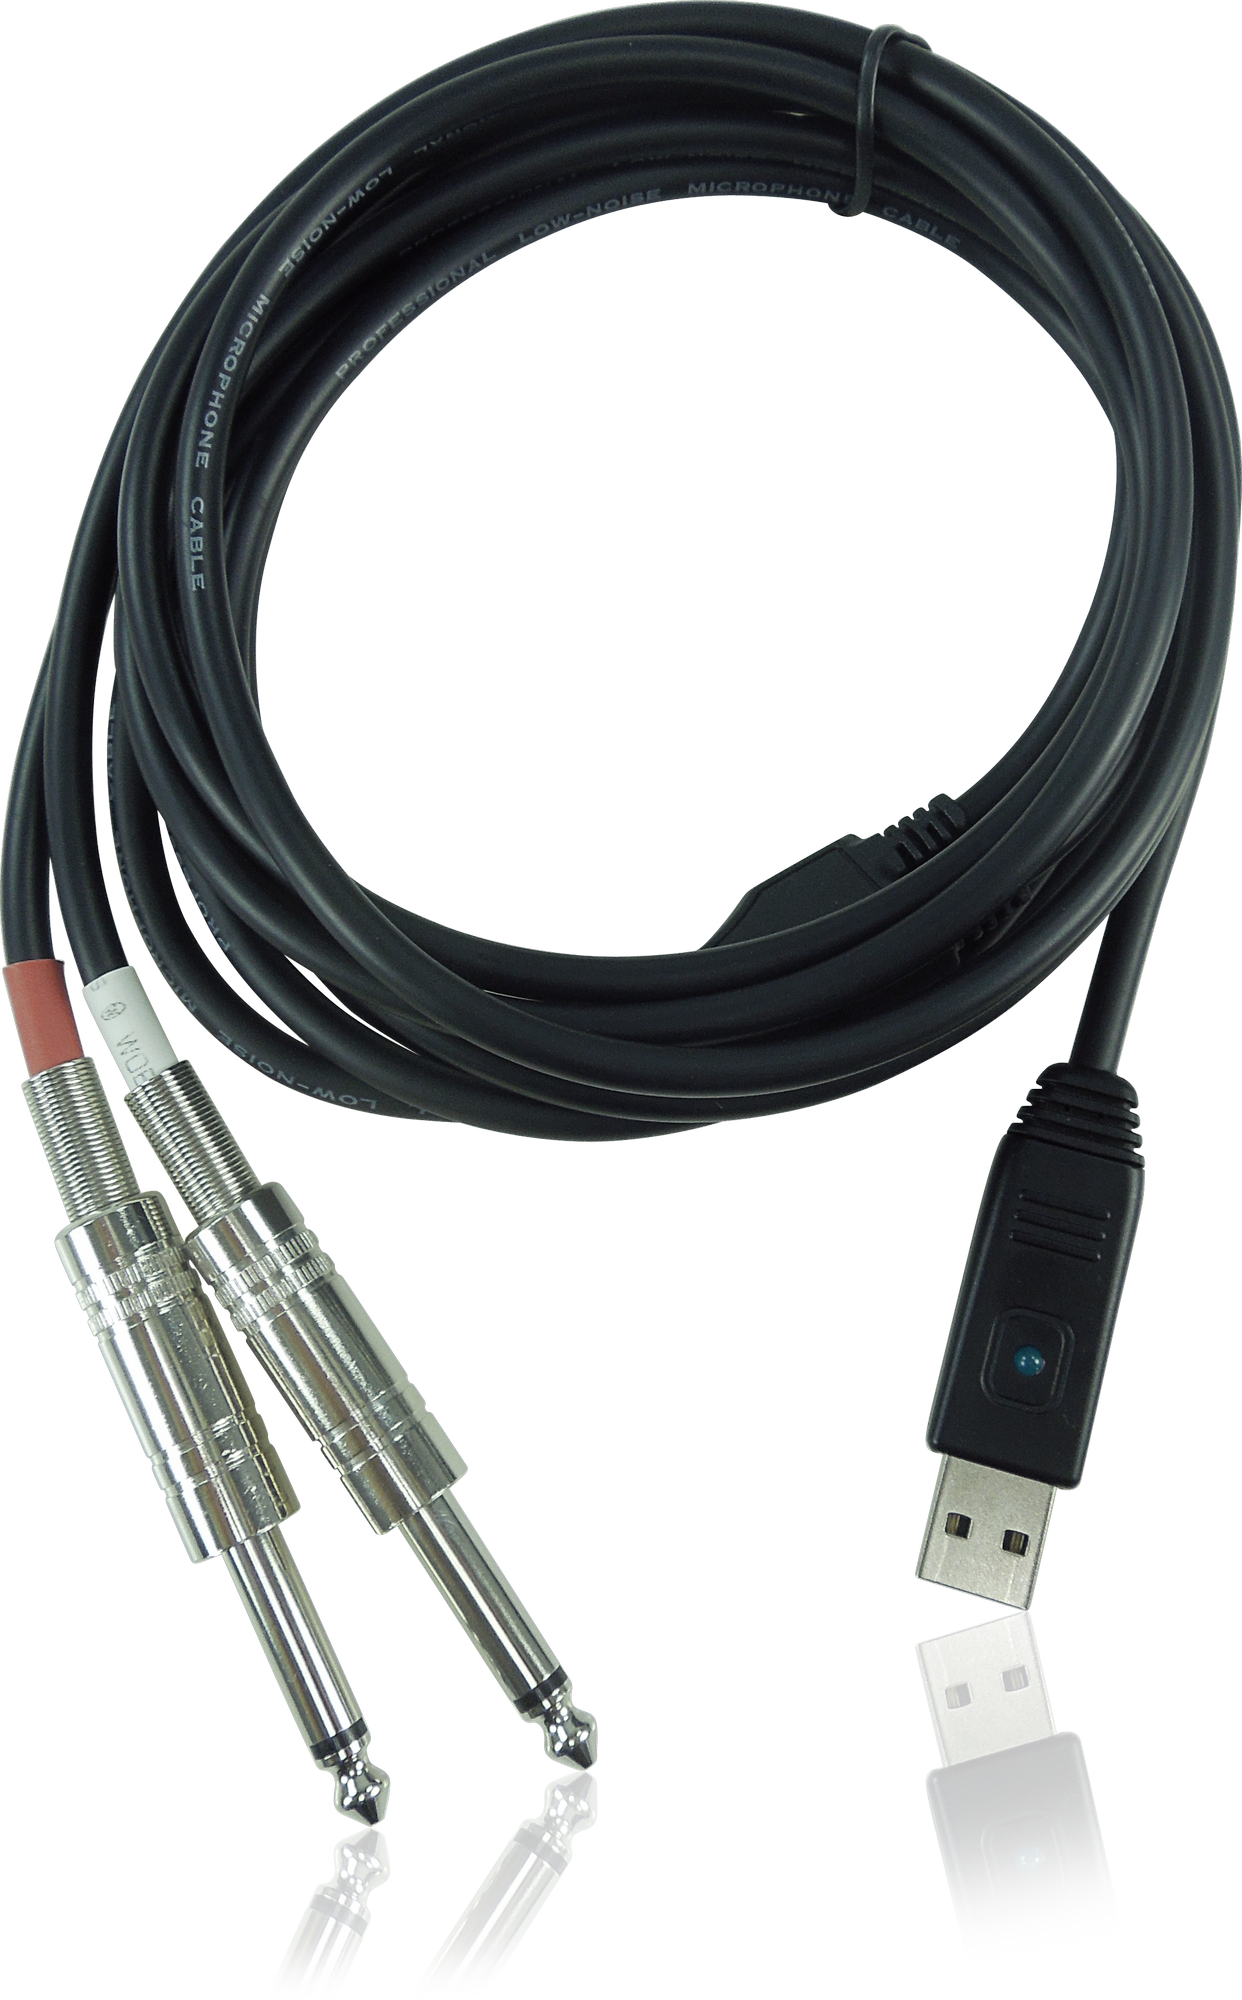 Behringer Mic2usb Xlr To Usb Interface Cable